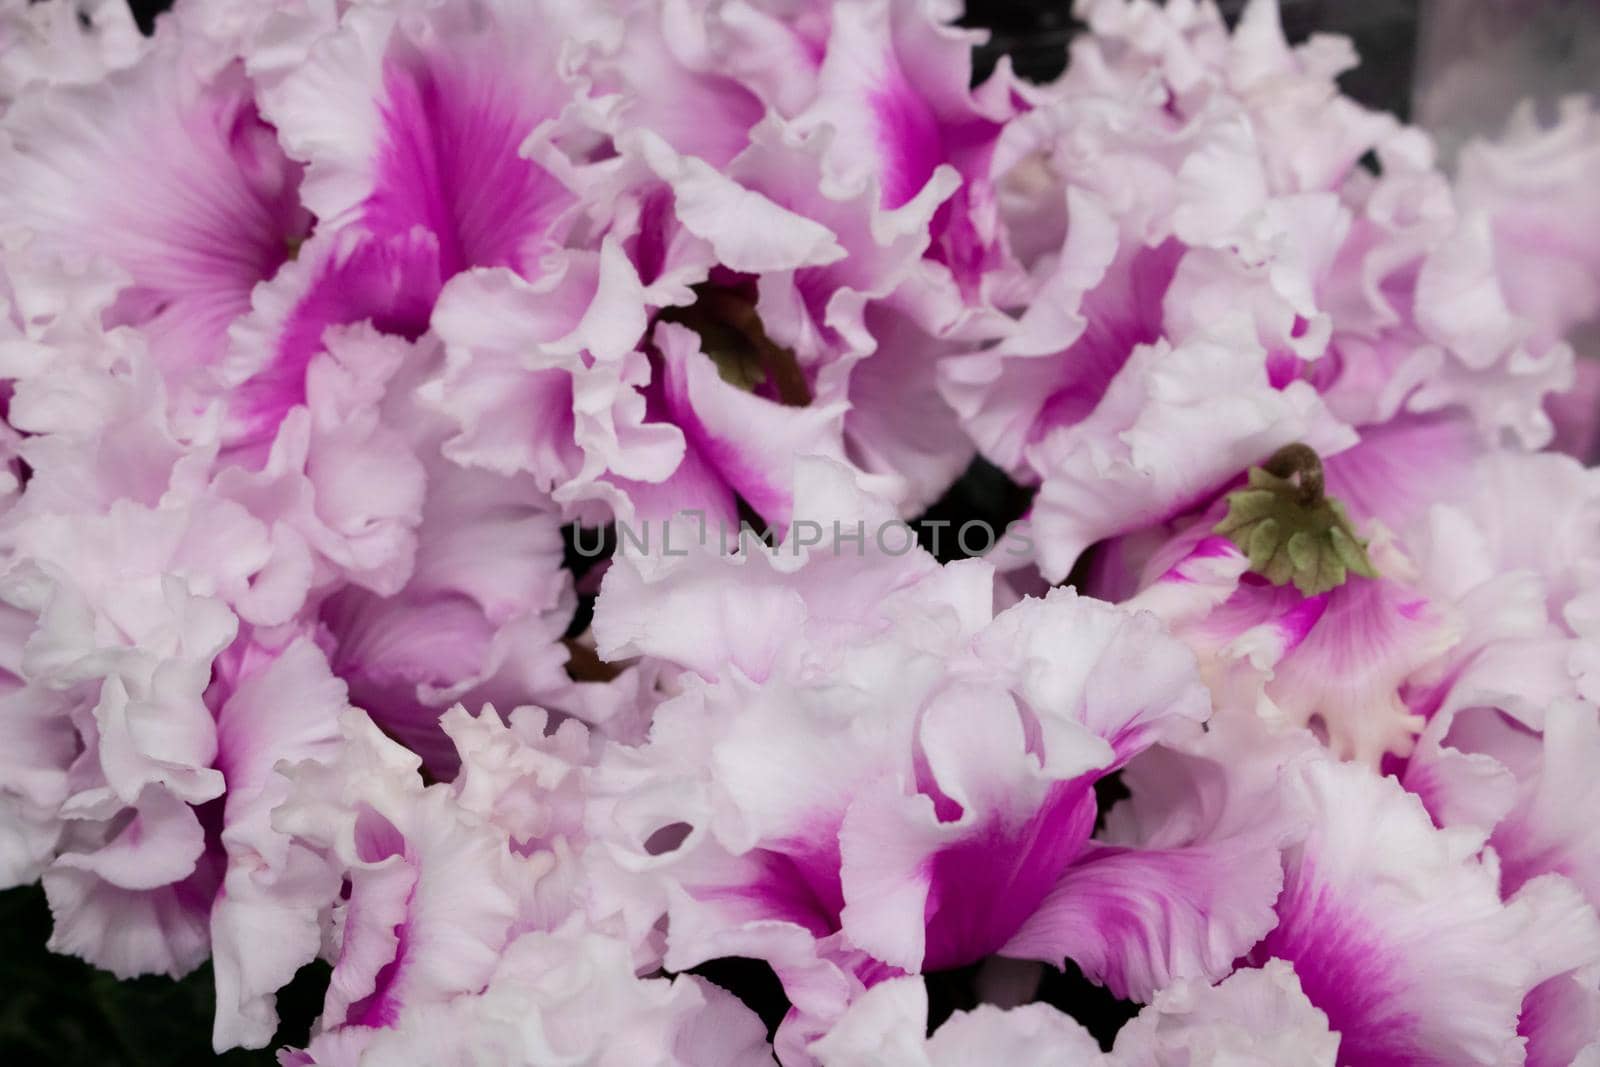 Cyclamen persicum.Flowering plants Bloom pink and white flowers